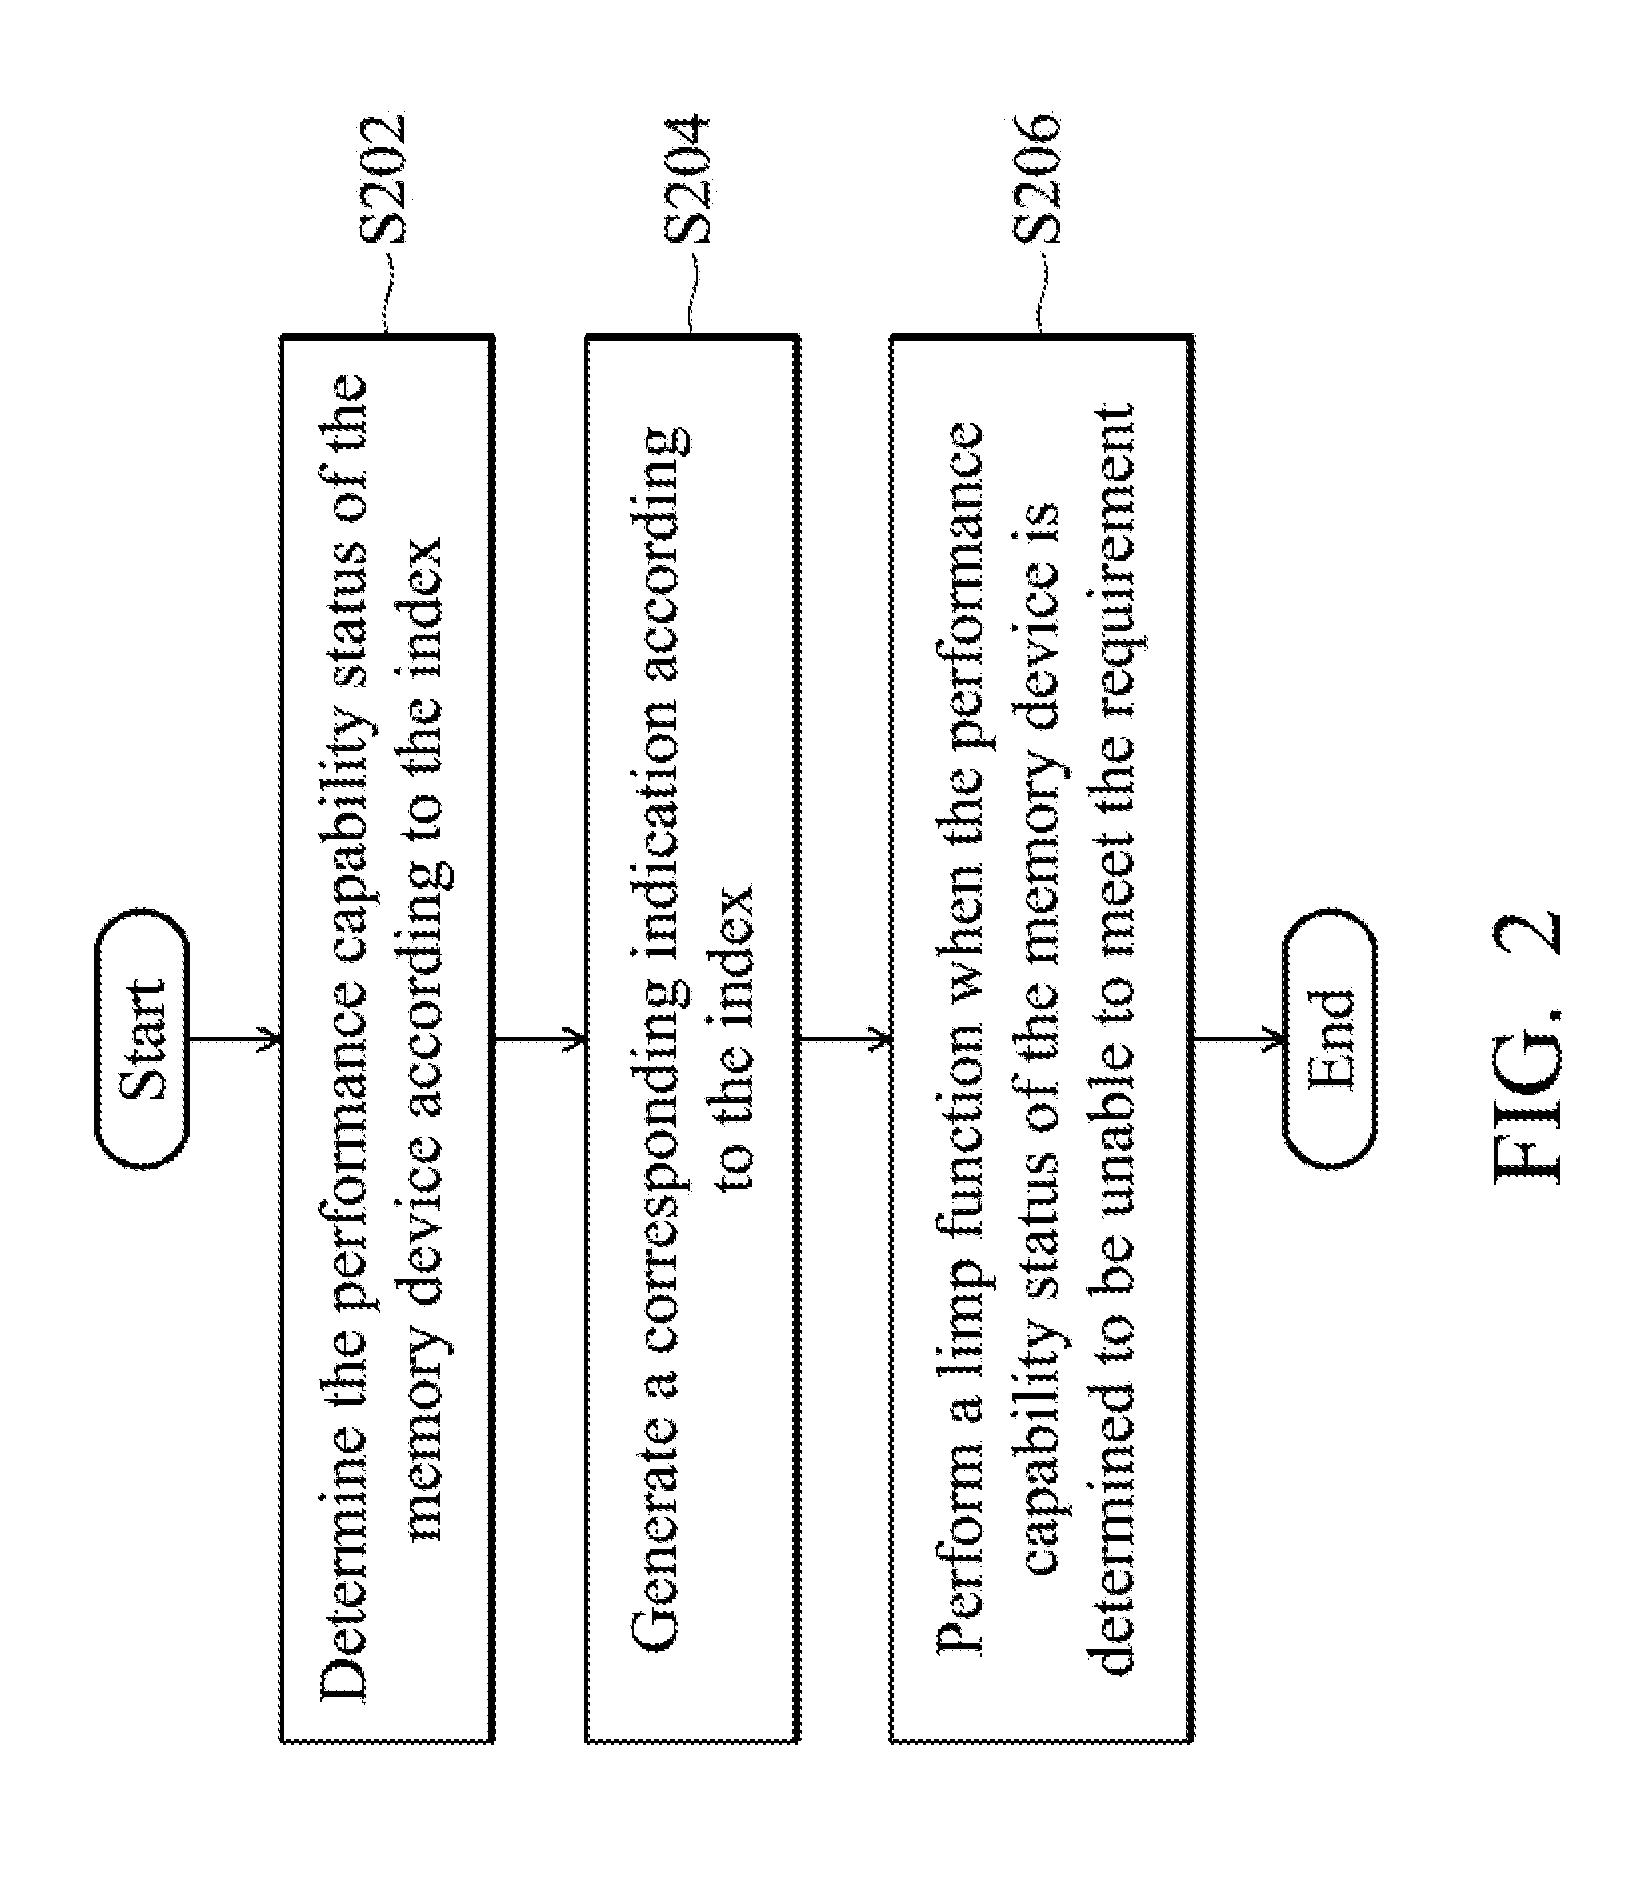 Methods for measuring usable lifespan and replacing an in-system programming code of a memory device, and data storage sysem using the same